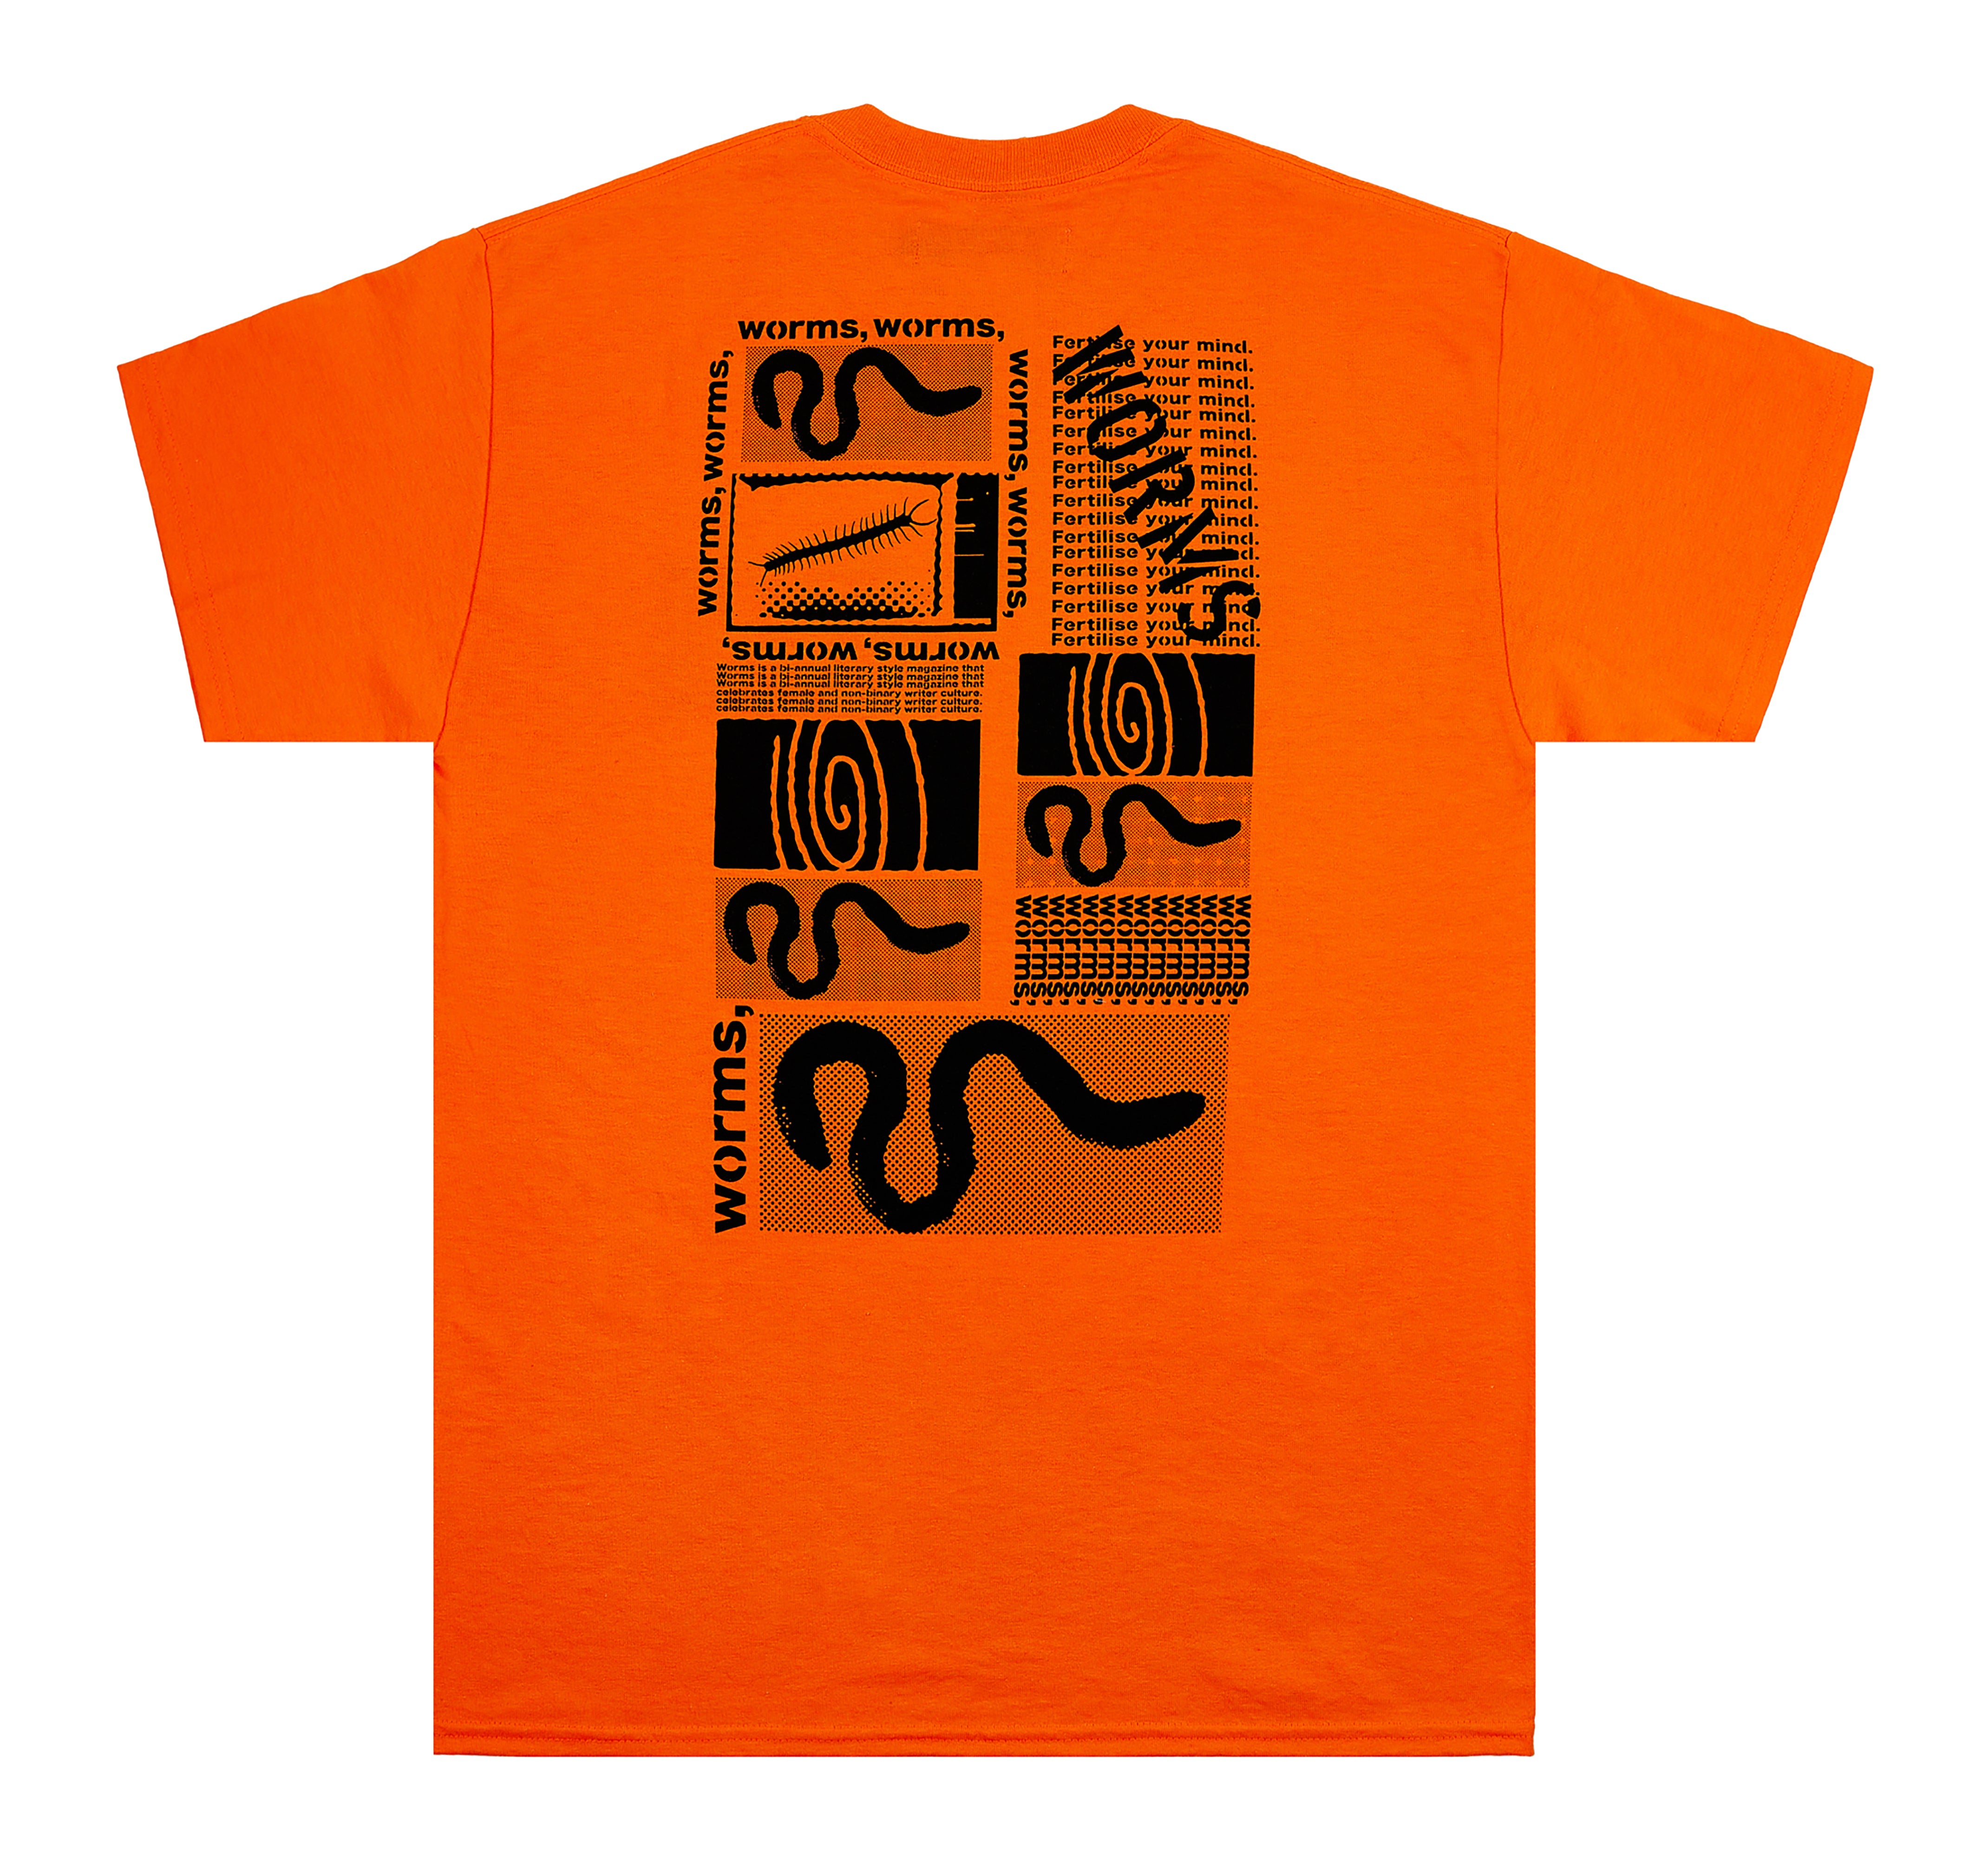 Worms T-Shirt - Dreamland Syndicate